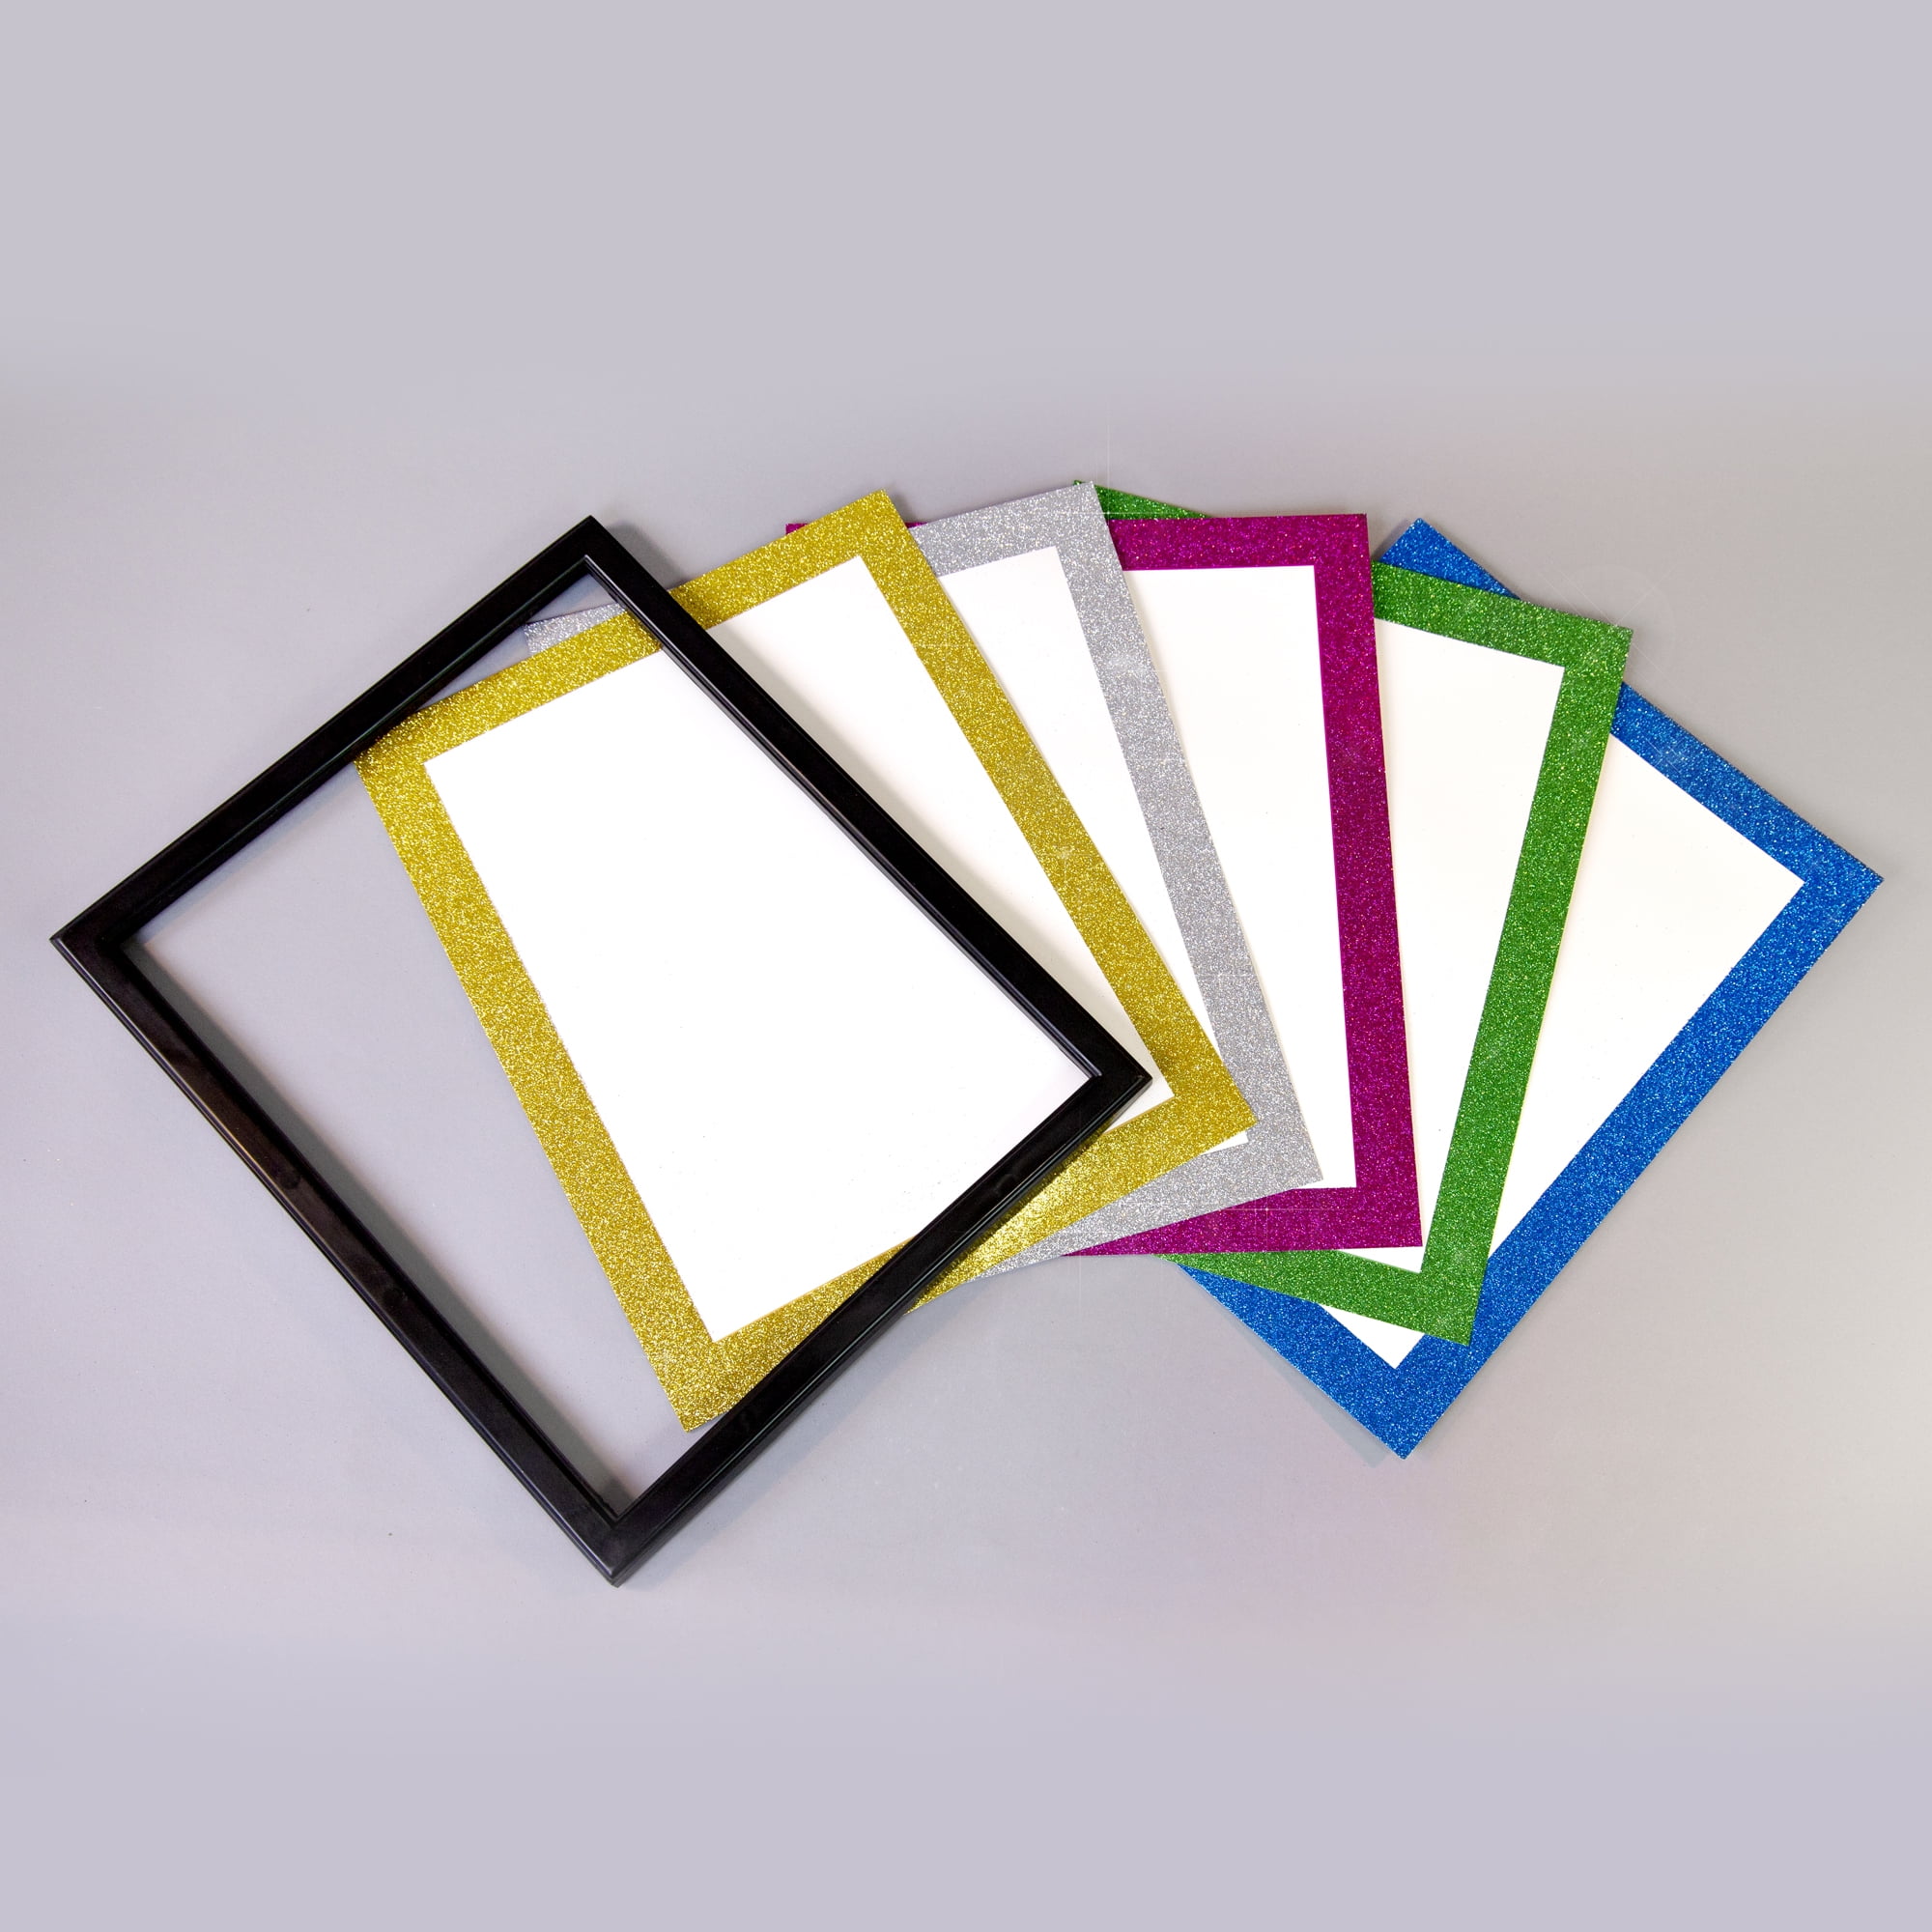 Poster Board White Paper Display 11”x14” Pack of 5